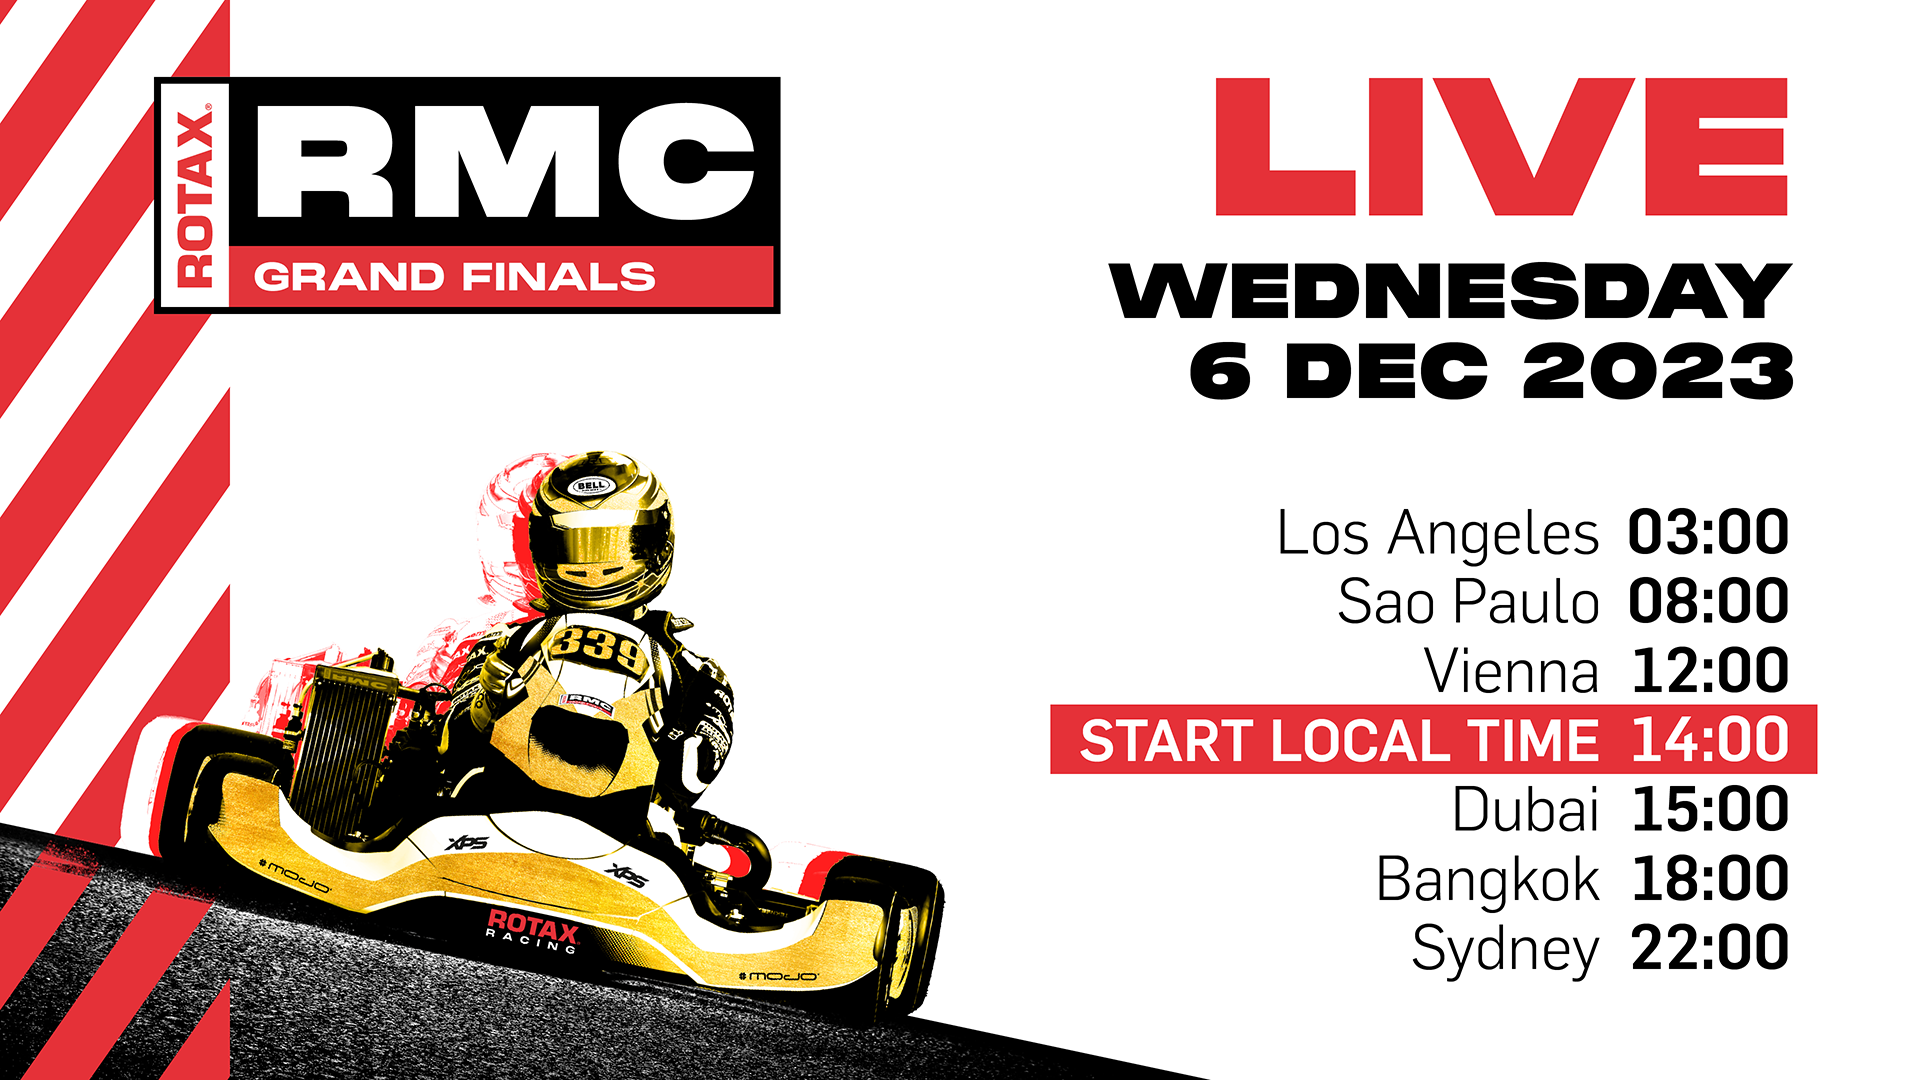 ROTAX RMCGF 2023 You Tube Channel LIVE TV 1920x1080px 06 12